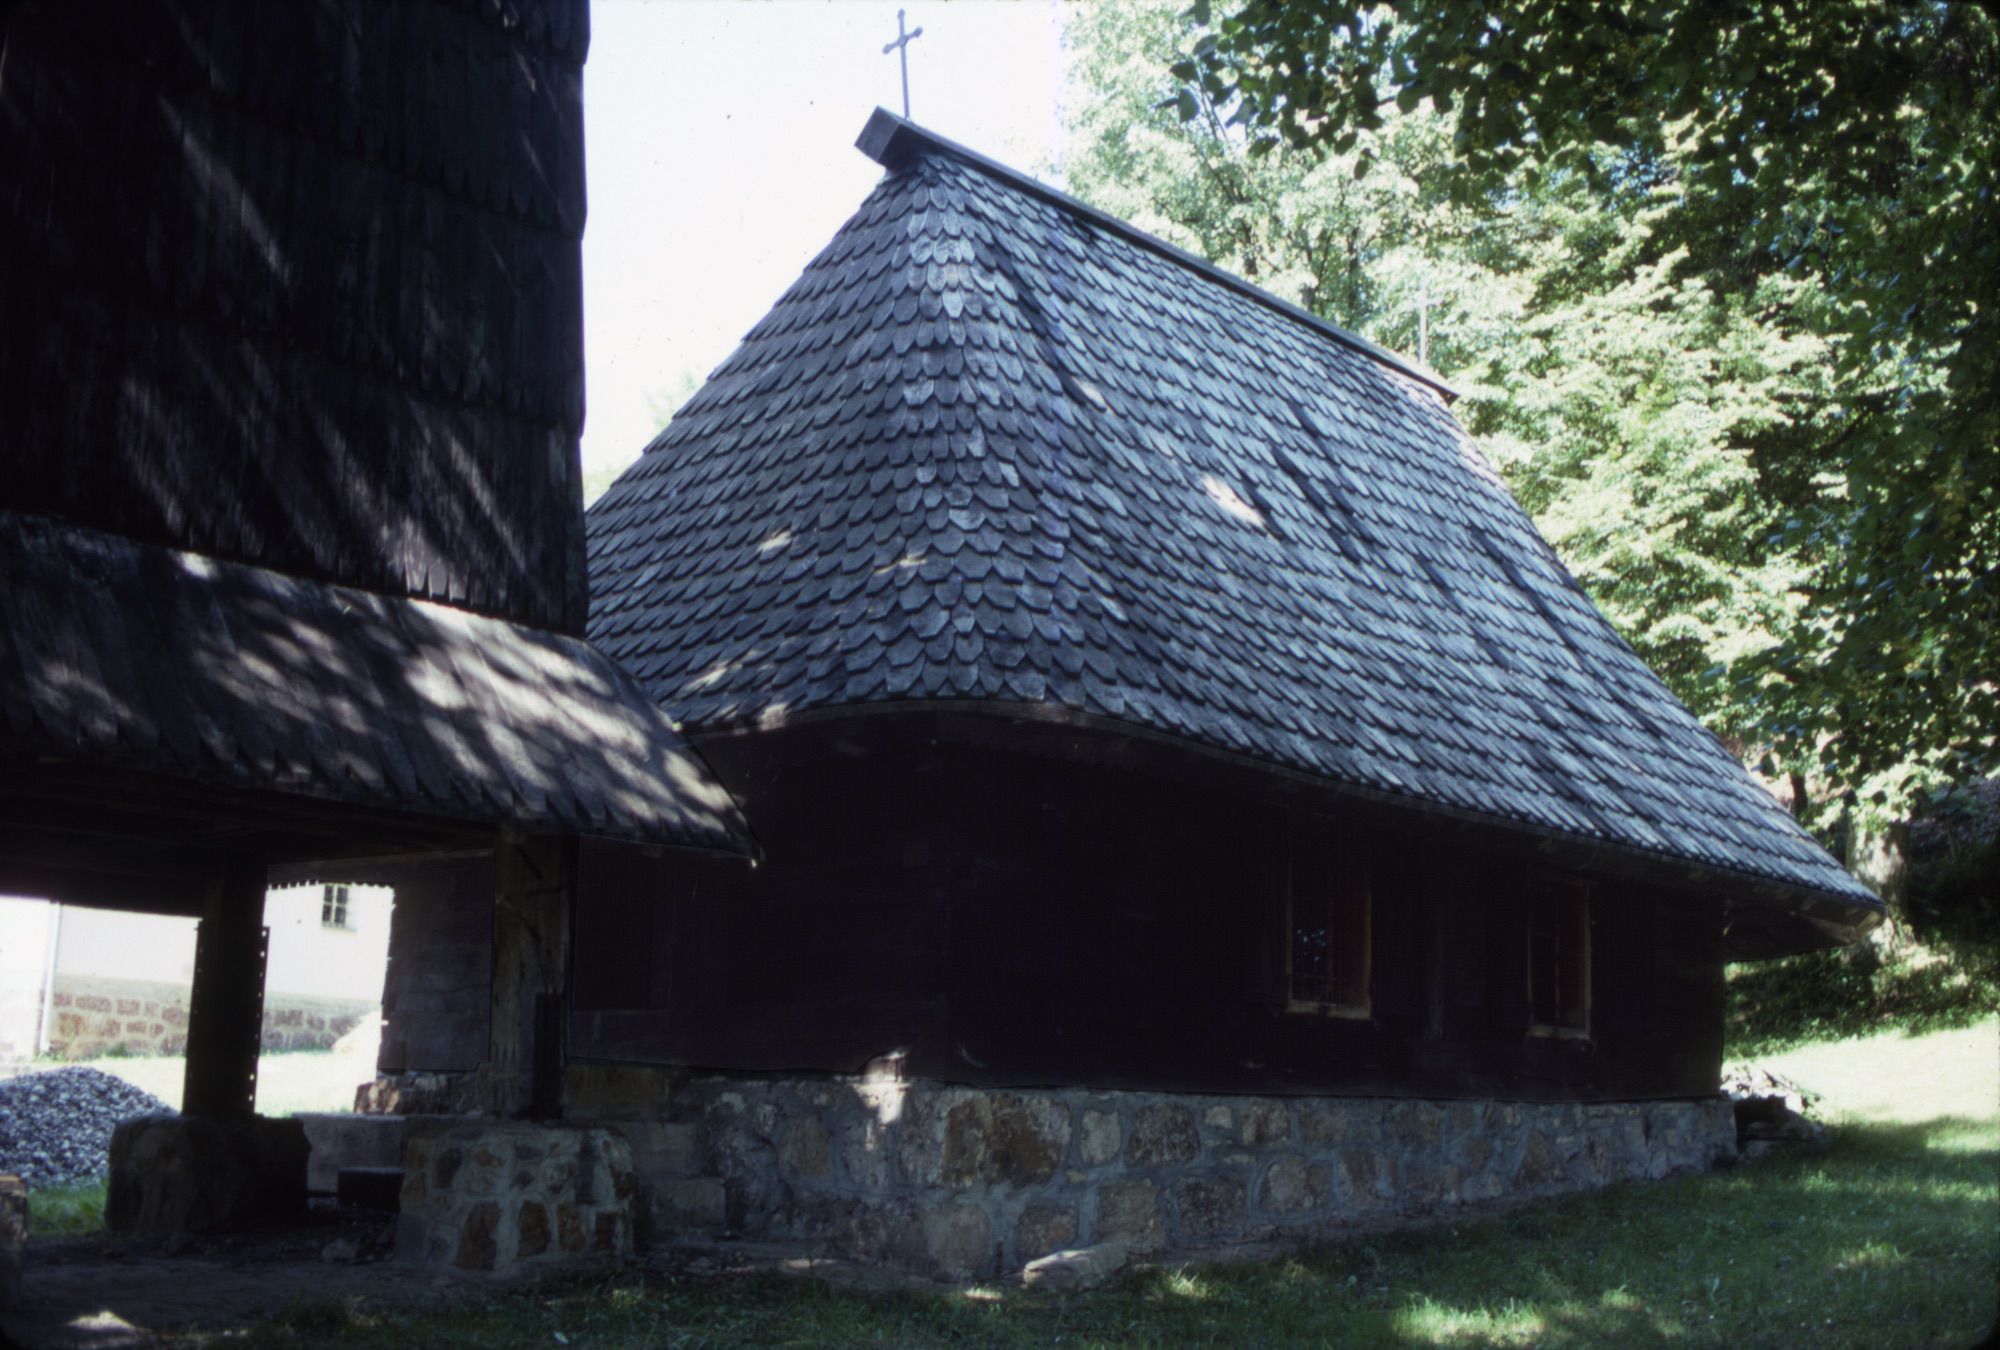 <p>The chapel's oak base member originally rested on the ground until a stone base was added during the last decade of the 19th century. The entry, on the west end of the chapel, is reached by ascending stone steps. The roof structure is constructed by a framework of rafters. The roof cap member does not serve as a ridge beam. The present windows are larger than the original windows according to records.</p>